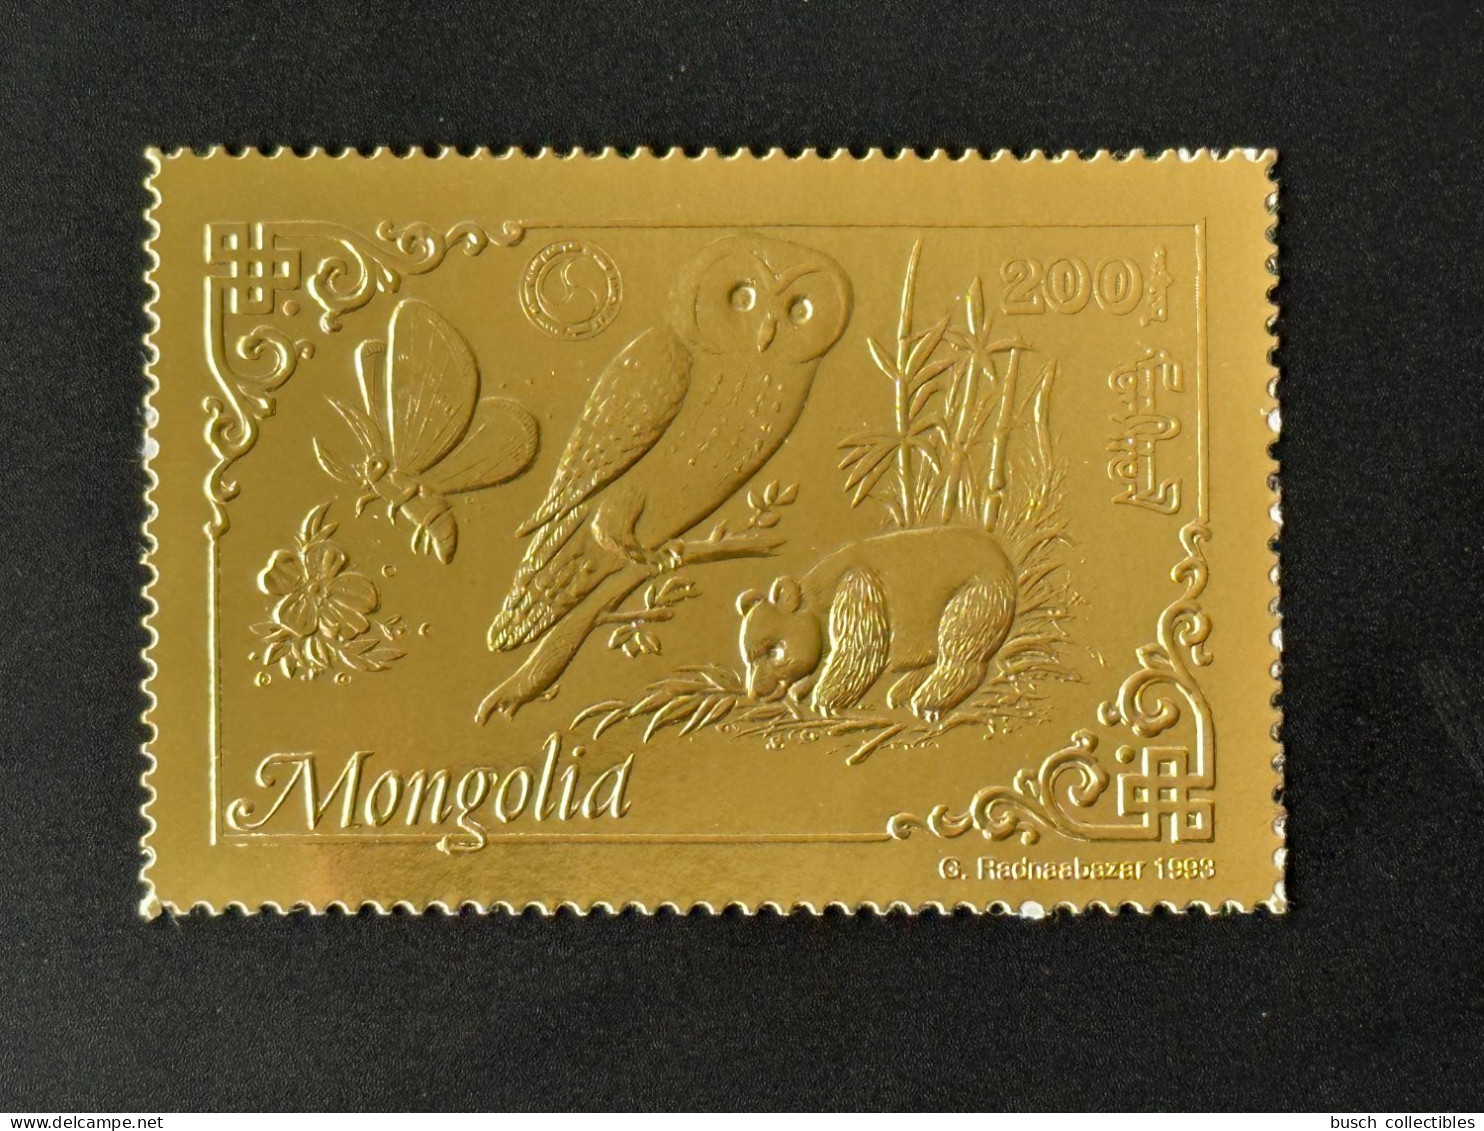 Mongolie Mongolia 1993 Mi. 2475 A Or Gold Rotary Lions Butterfly Owl Eule Panda Papillon Schmetterling Chouette - Mongolei